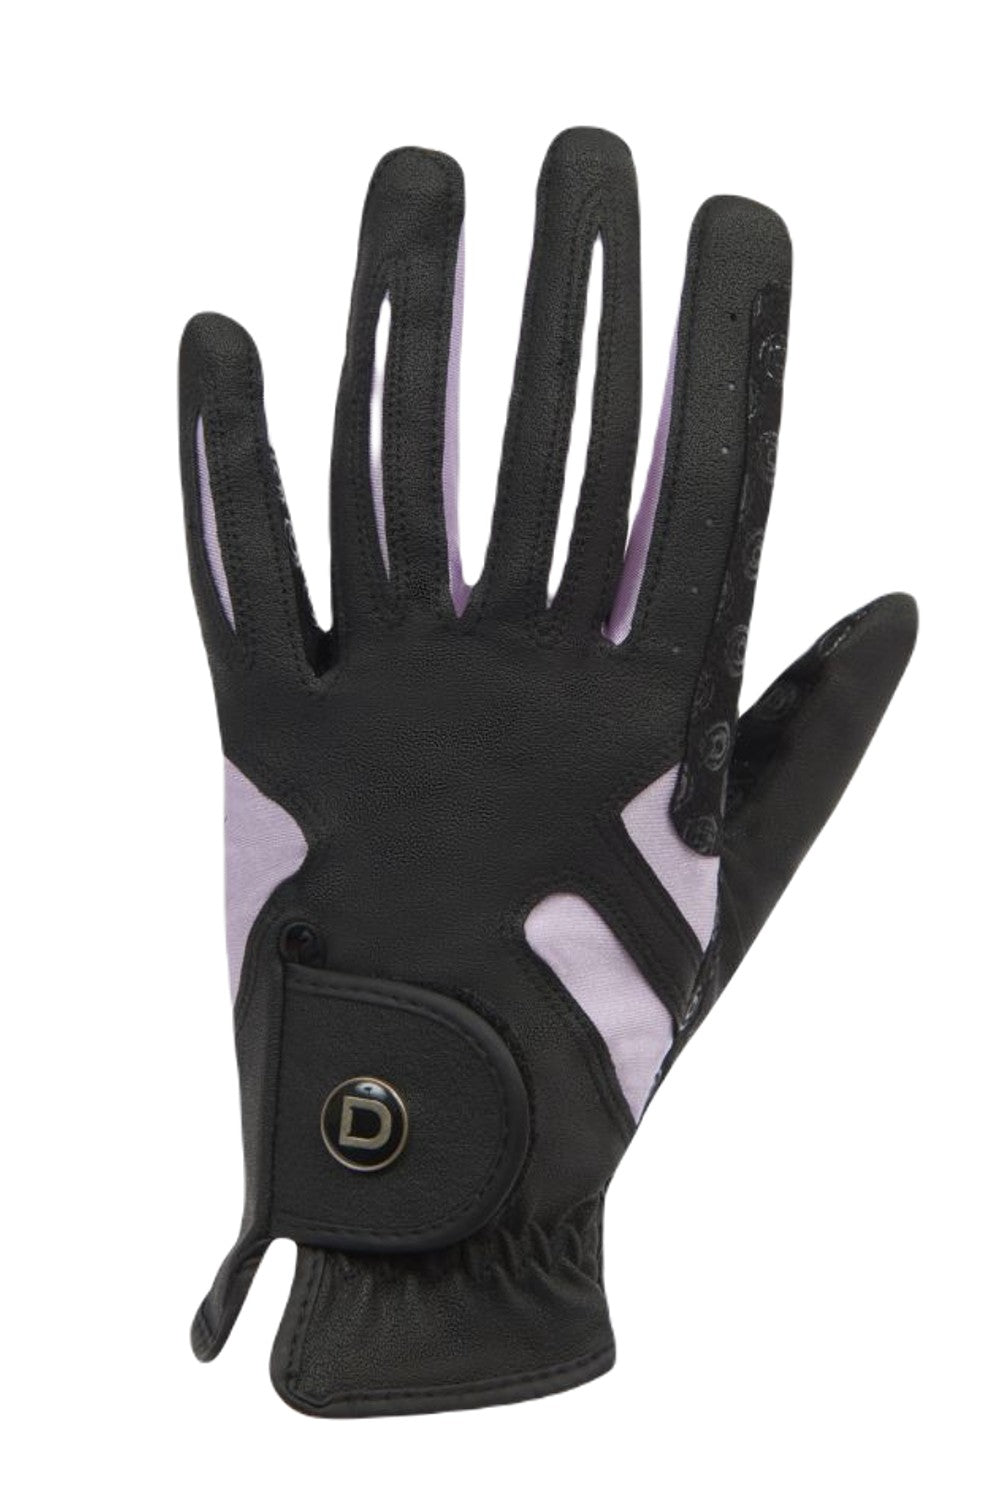 Dublin Cool-It Gel Riding Gloves In Black/Pink Front 